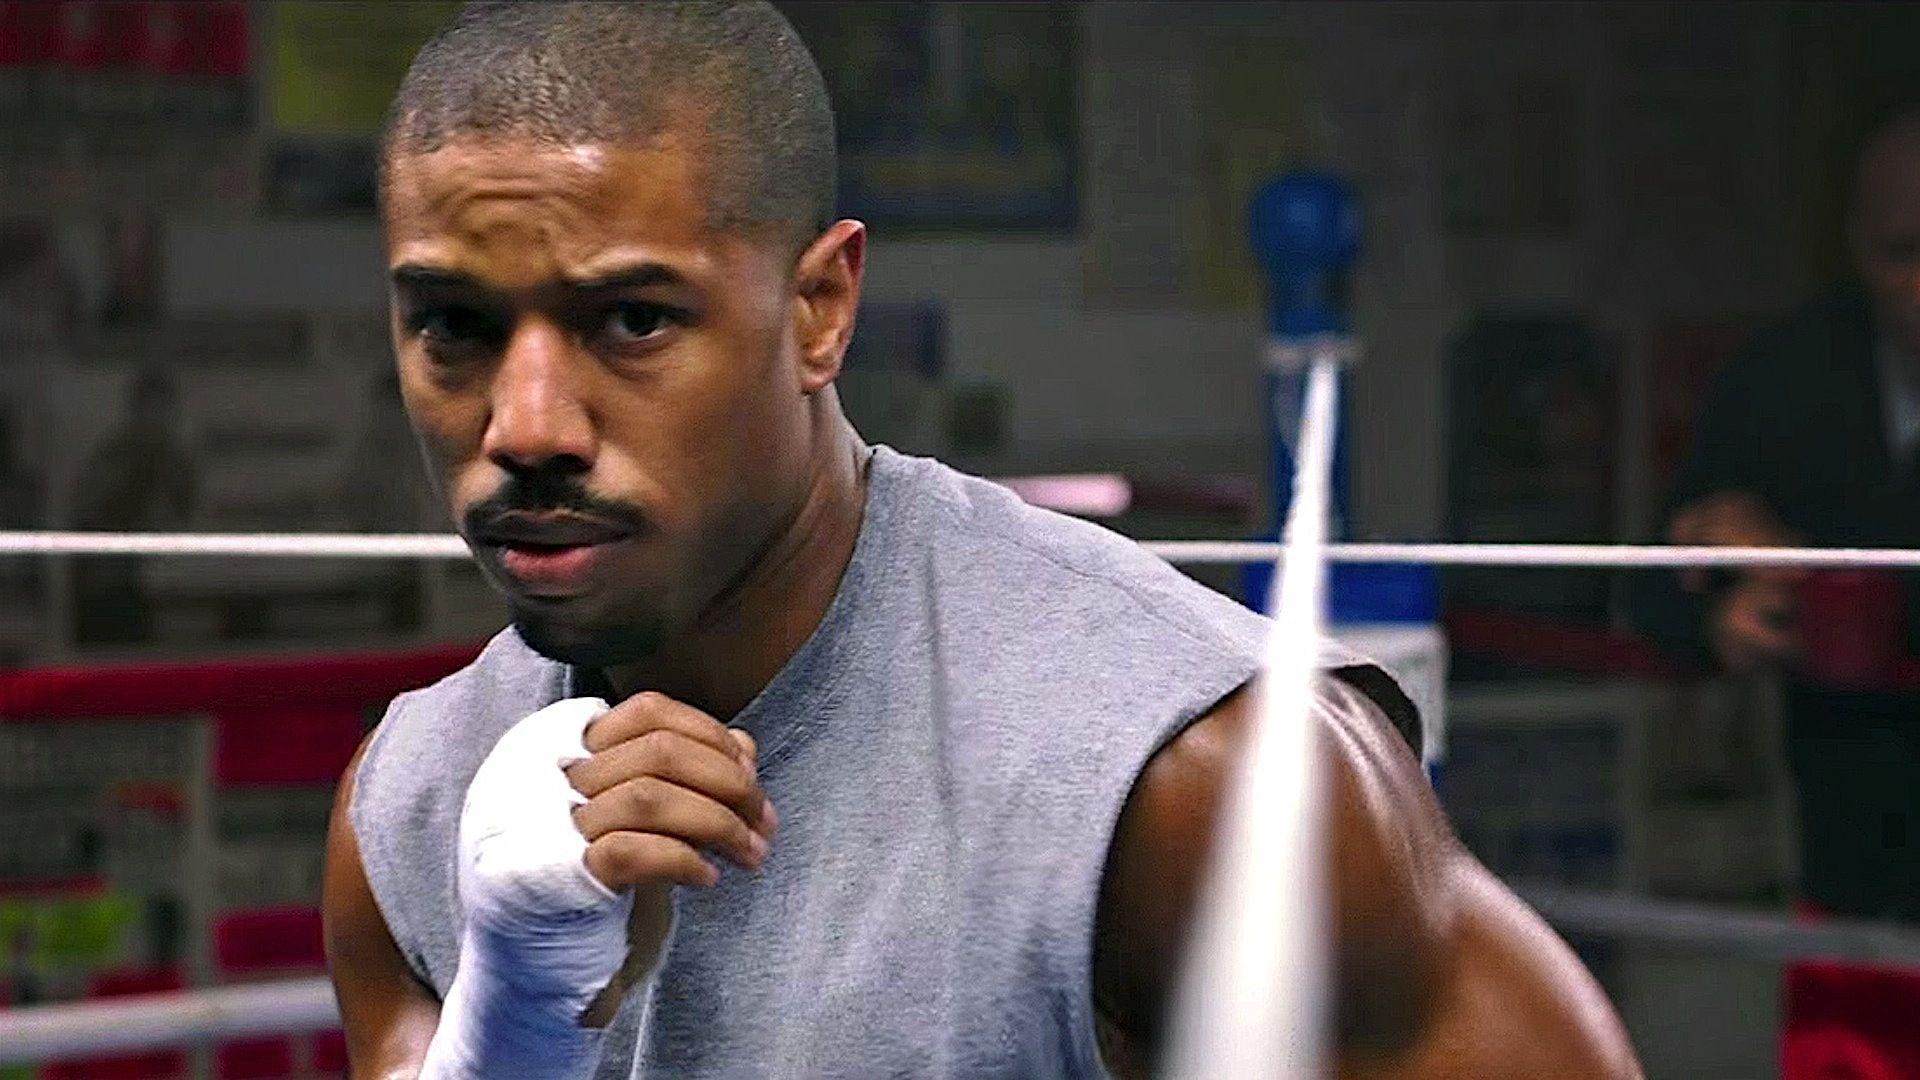 Michael B. Jordan On His First Creed Knockout: “We Worked On It